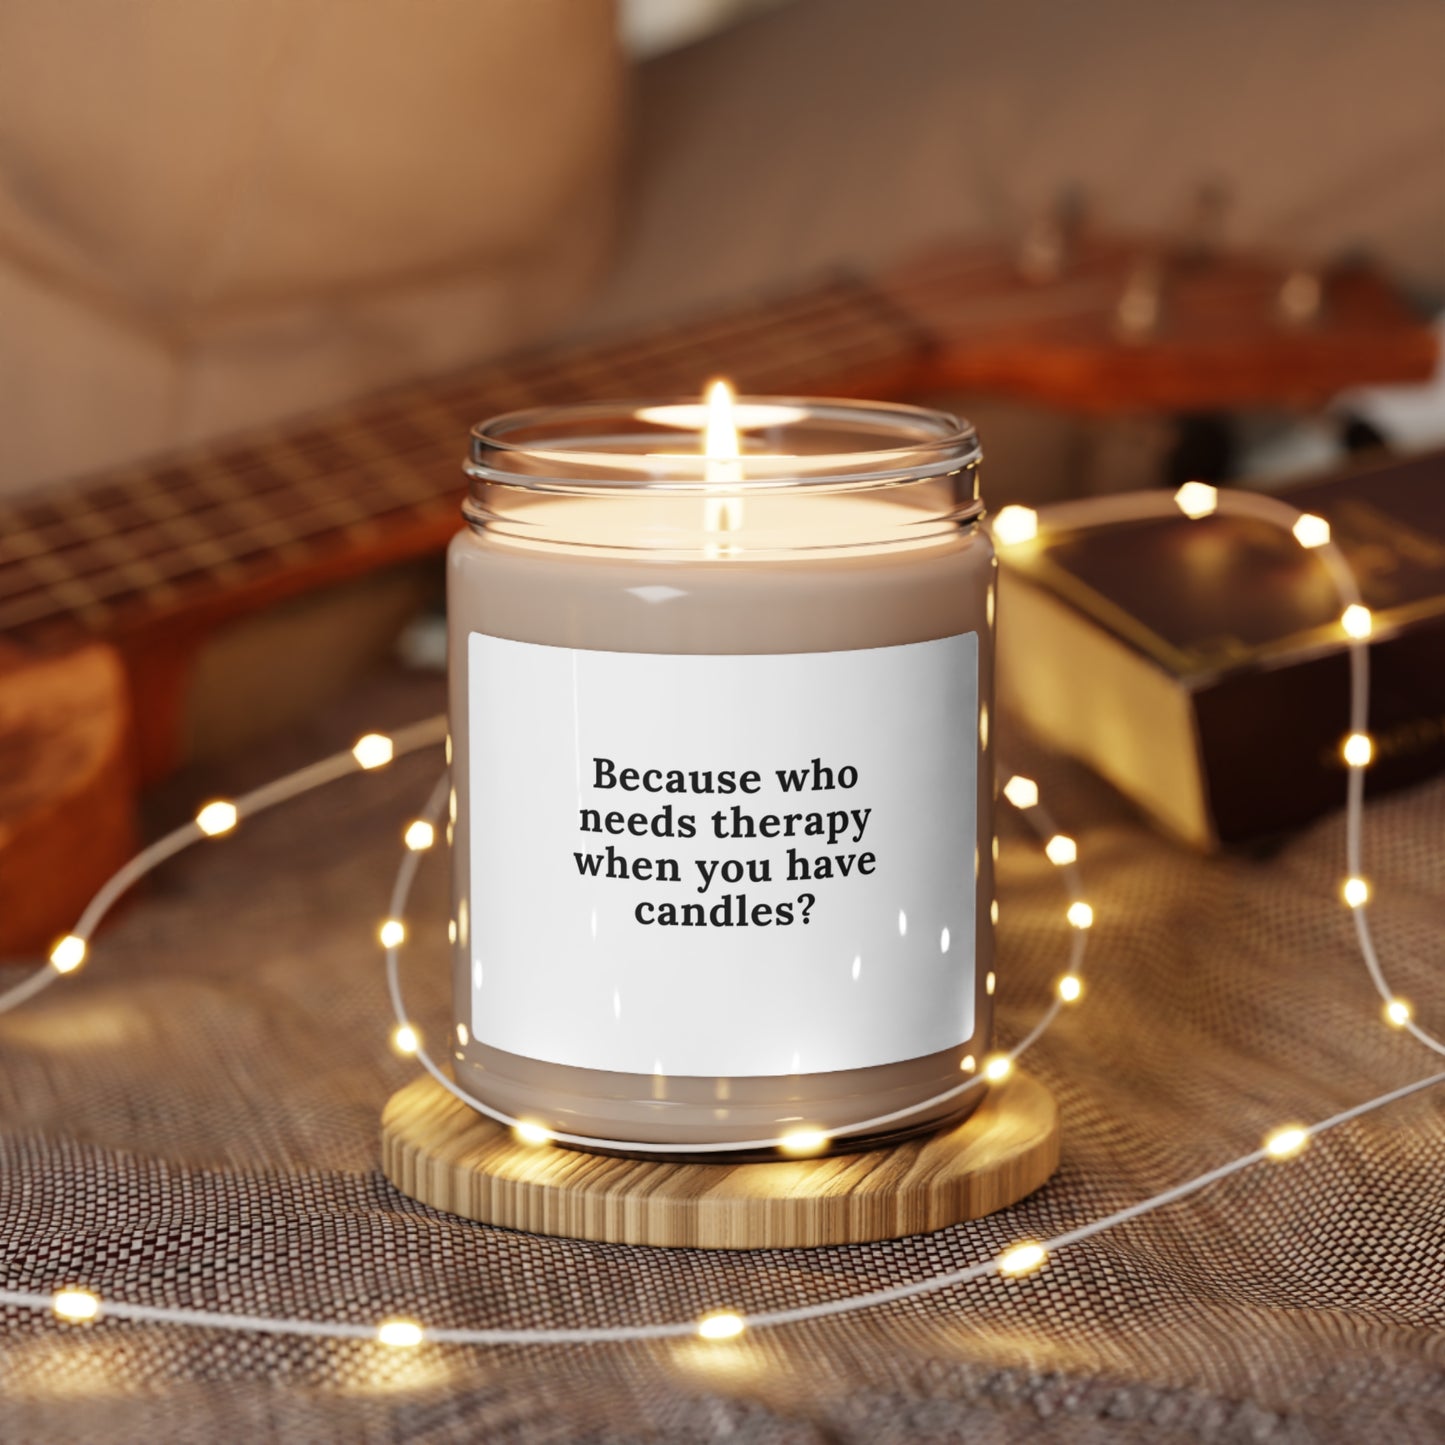 Because who needs therapy when you have candles?